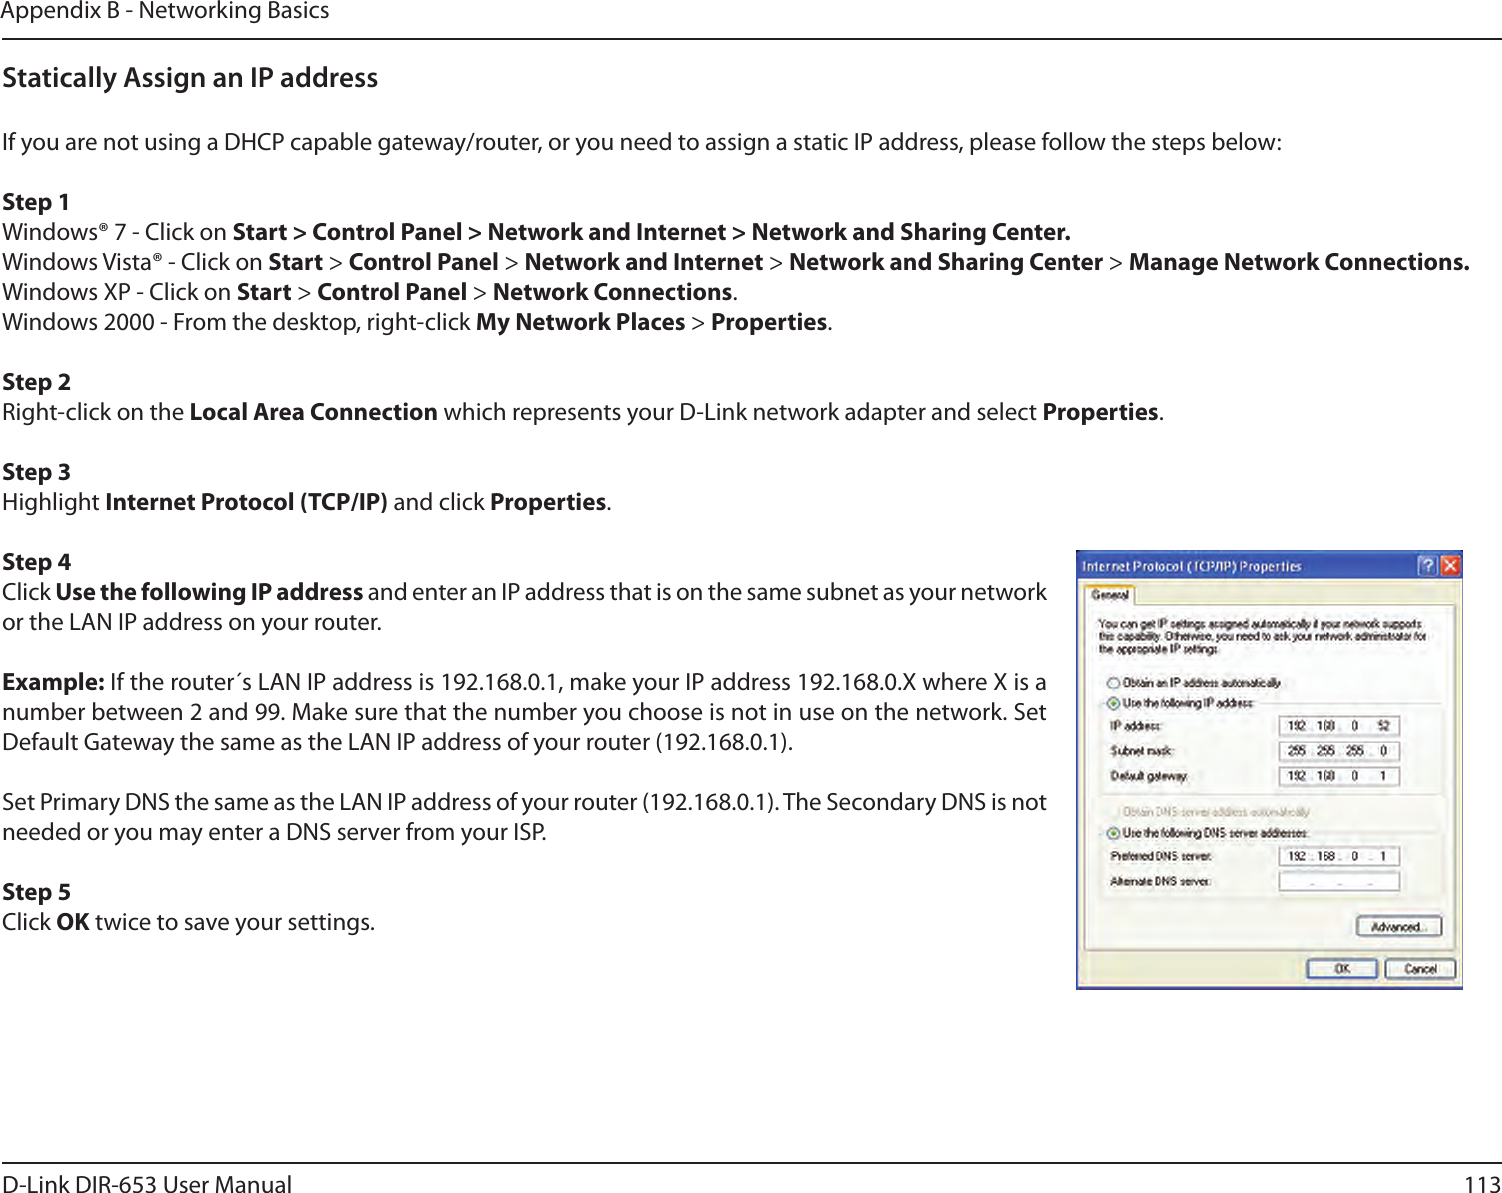 113D-Link DIR-653 User ManualAppendix B - Networking BasicsStatically Assign an IP addressIf you are not using a DHCP capable gateway/router, or you need to assign a static IP address, please follow the steps below:Step 1Windows® 7 - Click on Start &gt; Control Panel &gt; Network and Internet &gt; Network and Sharing Center.Windows Vista® - Click on Start &gt; Control Panel &gt; Network and Internet &gt; Network and Sharing Center &gt; Manage Network Connections.Windows XP - Click on Start &gt; Control Panel &gt; Network Connections.Windows 2000 - From the desktop, right-click My Network Places &gt; Properties.Step 2Right-click on the Local Area Connection which represents your D-Link network adapter and select Properties.Step 3Highlight Internet Protocol (TCP/IP) and click Properties.Step 4Click Use the following IP address and enter an IP address that is on the same subnet as your network or the LAN IP address on your router. Example: If the router´s LAN IP address is 192.168.0.1, make your IP address 192.168.0.X where X is a number between 2 and 99. Make sure that the number you choose is not in use on the network. Set Default Gateway the same as the LAN IP address of your router (192.168.0.1). Set Primary DNS the same as the LAN IP address of your router (192.168.0.1). The Secondary DNS is not needed or you may enter a DNS server from your ISP.Step 5Click OK twice to save your settings.